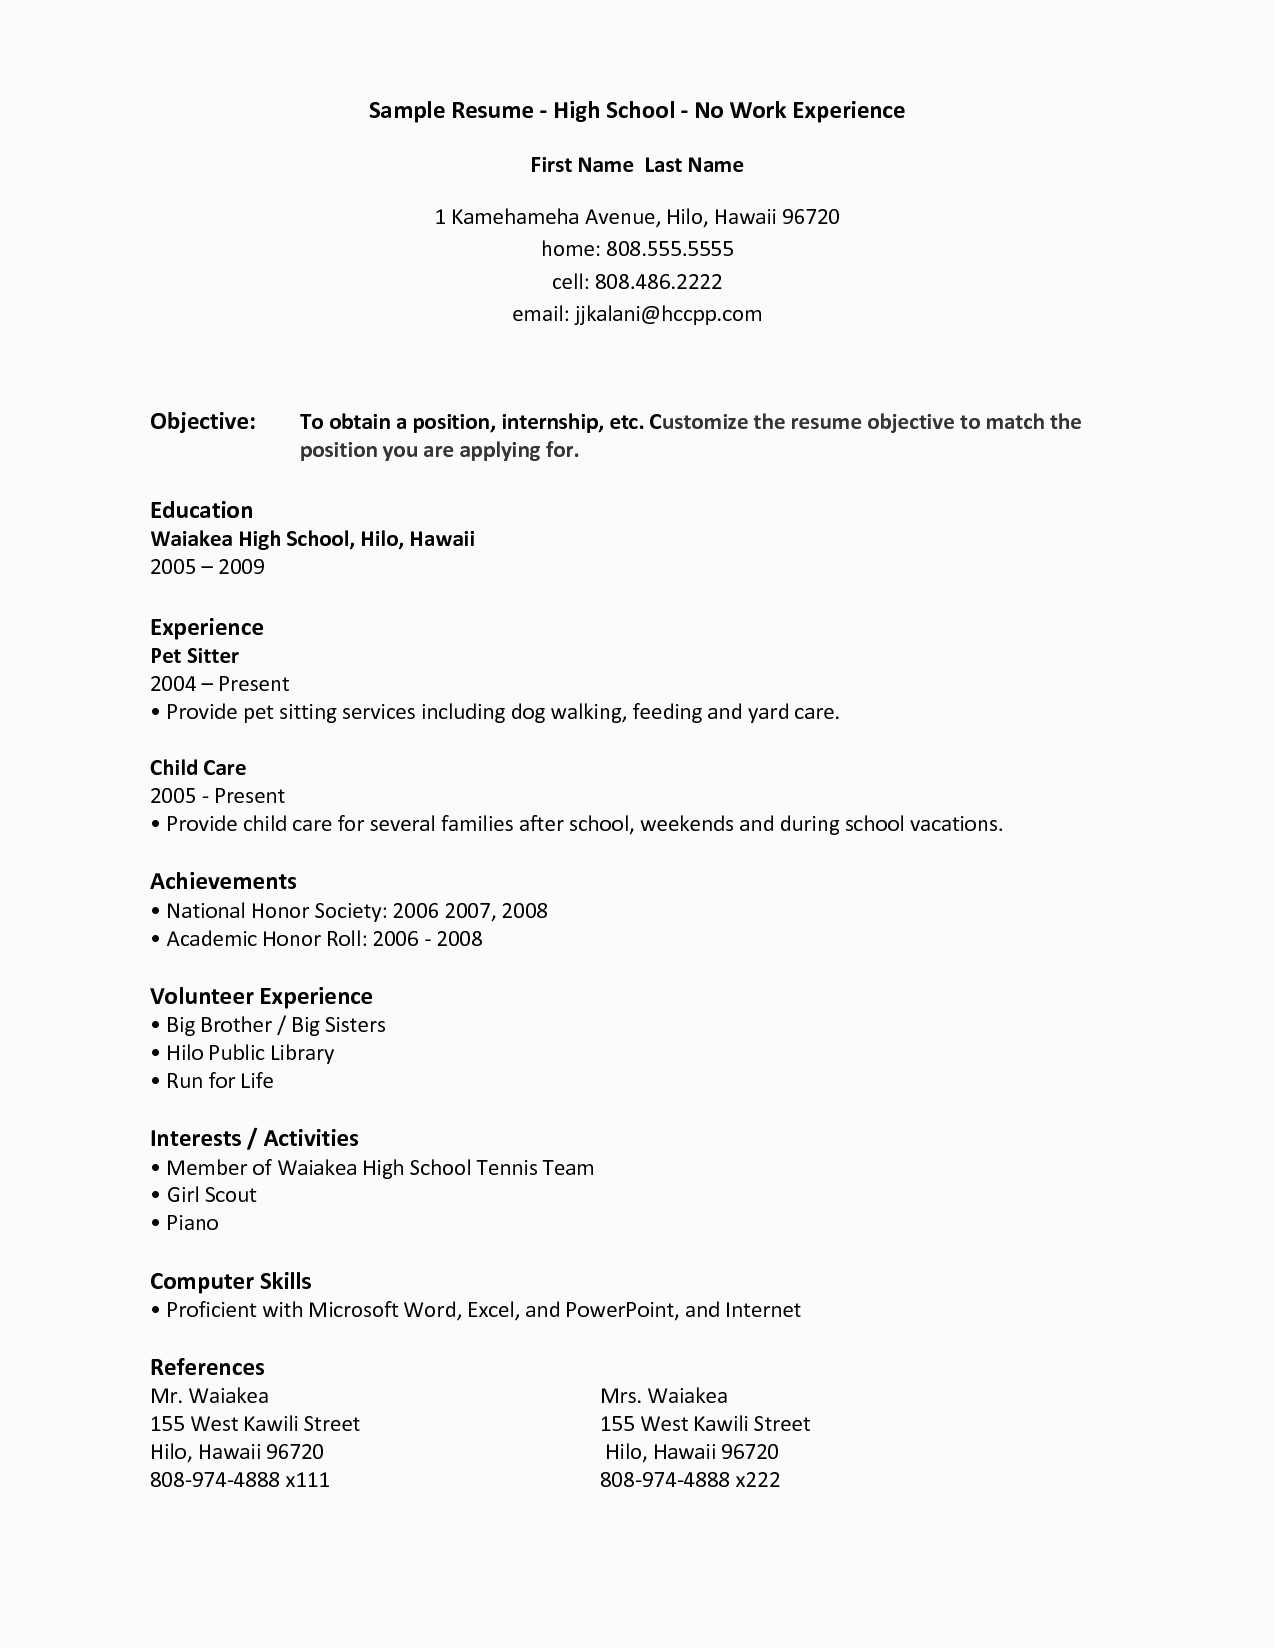 Sample High School Graduate Resume No Experience Resume for Students with No Experience – Task List Templates